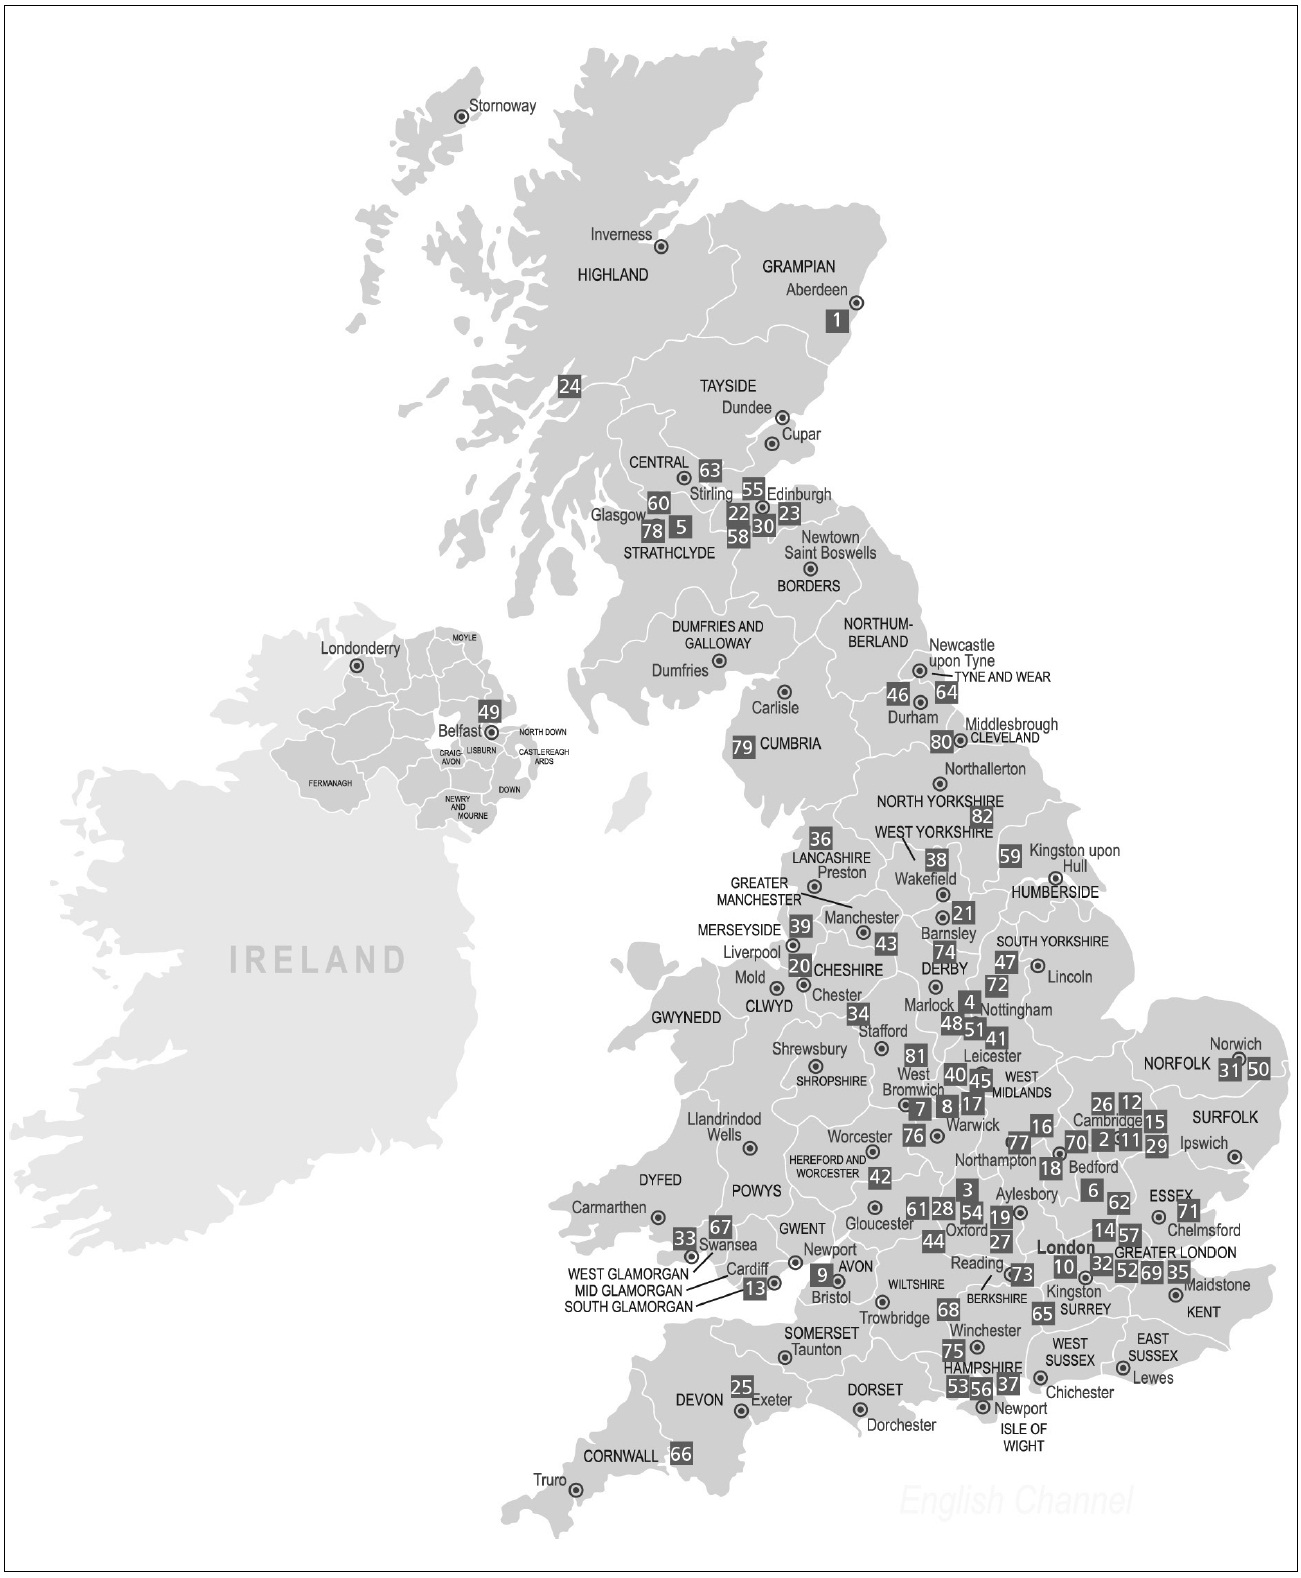 The location of the UK science parks that are members of the UK Science Park Association